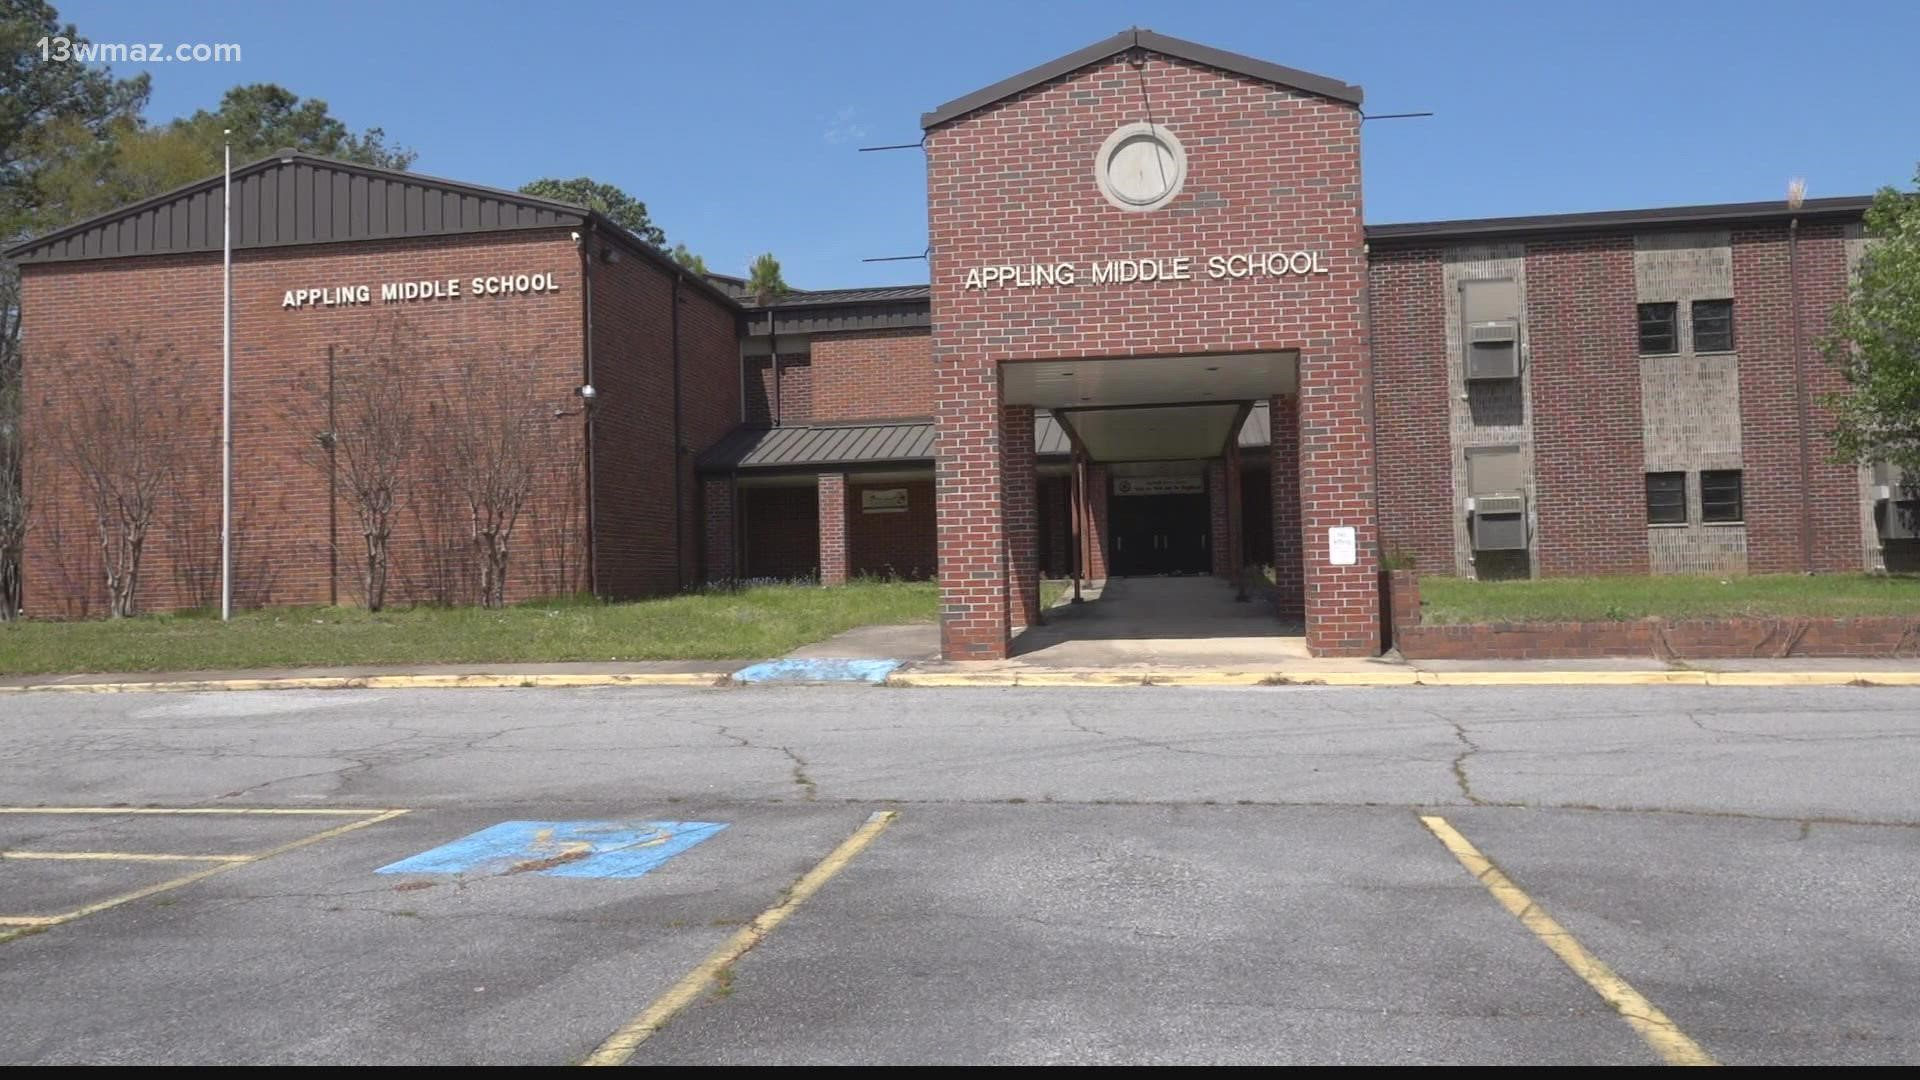 East Macon residents compromise to save Appling Middle School 13wmaz com